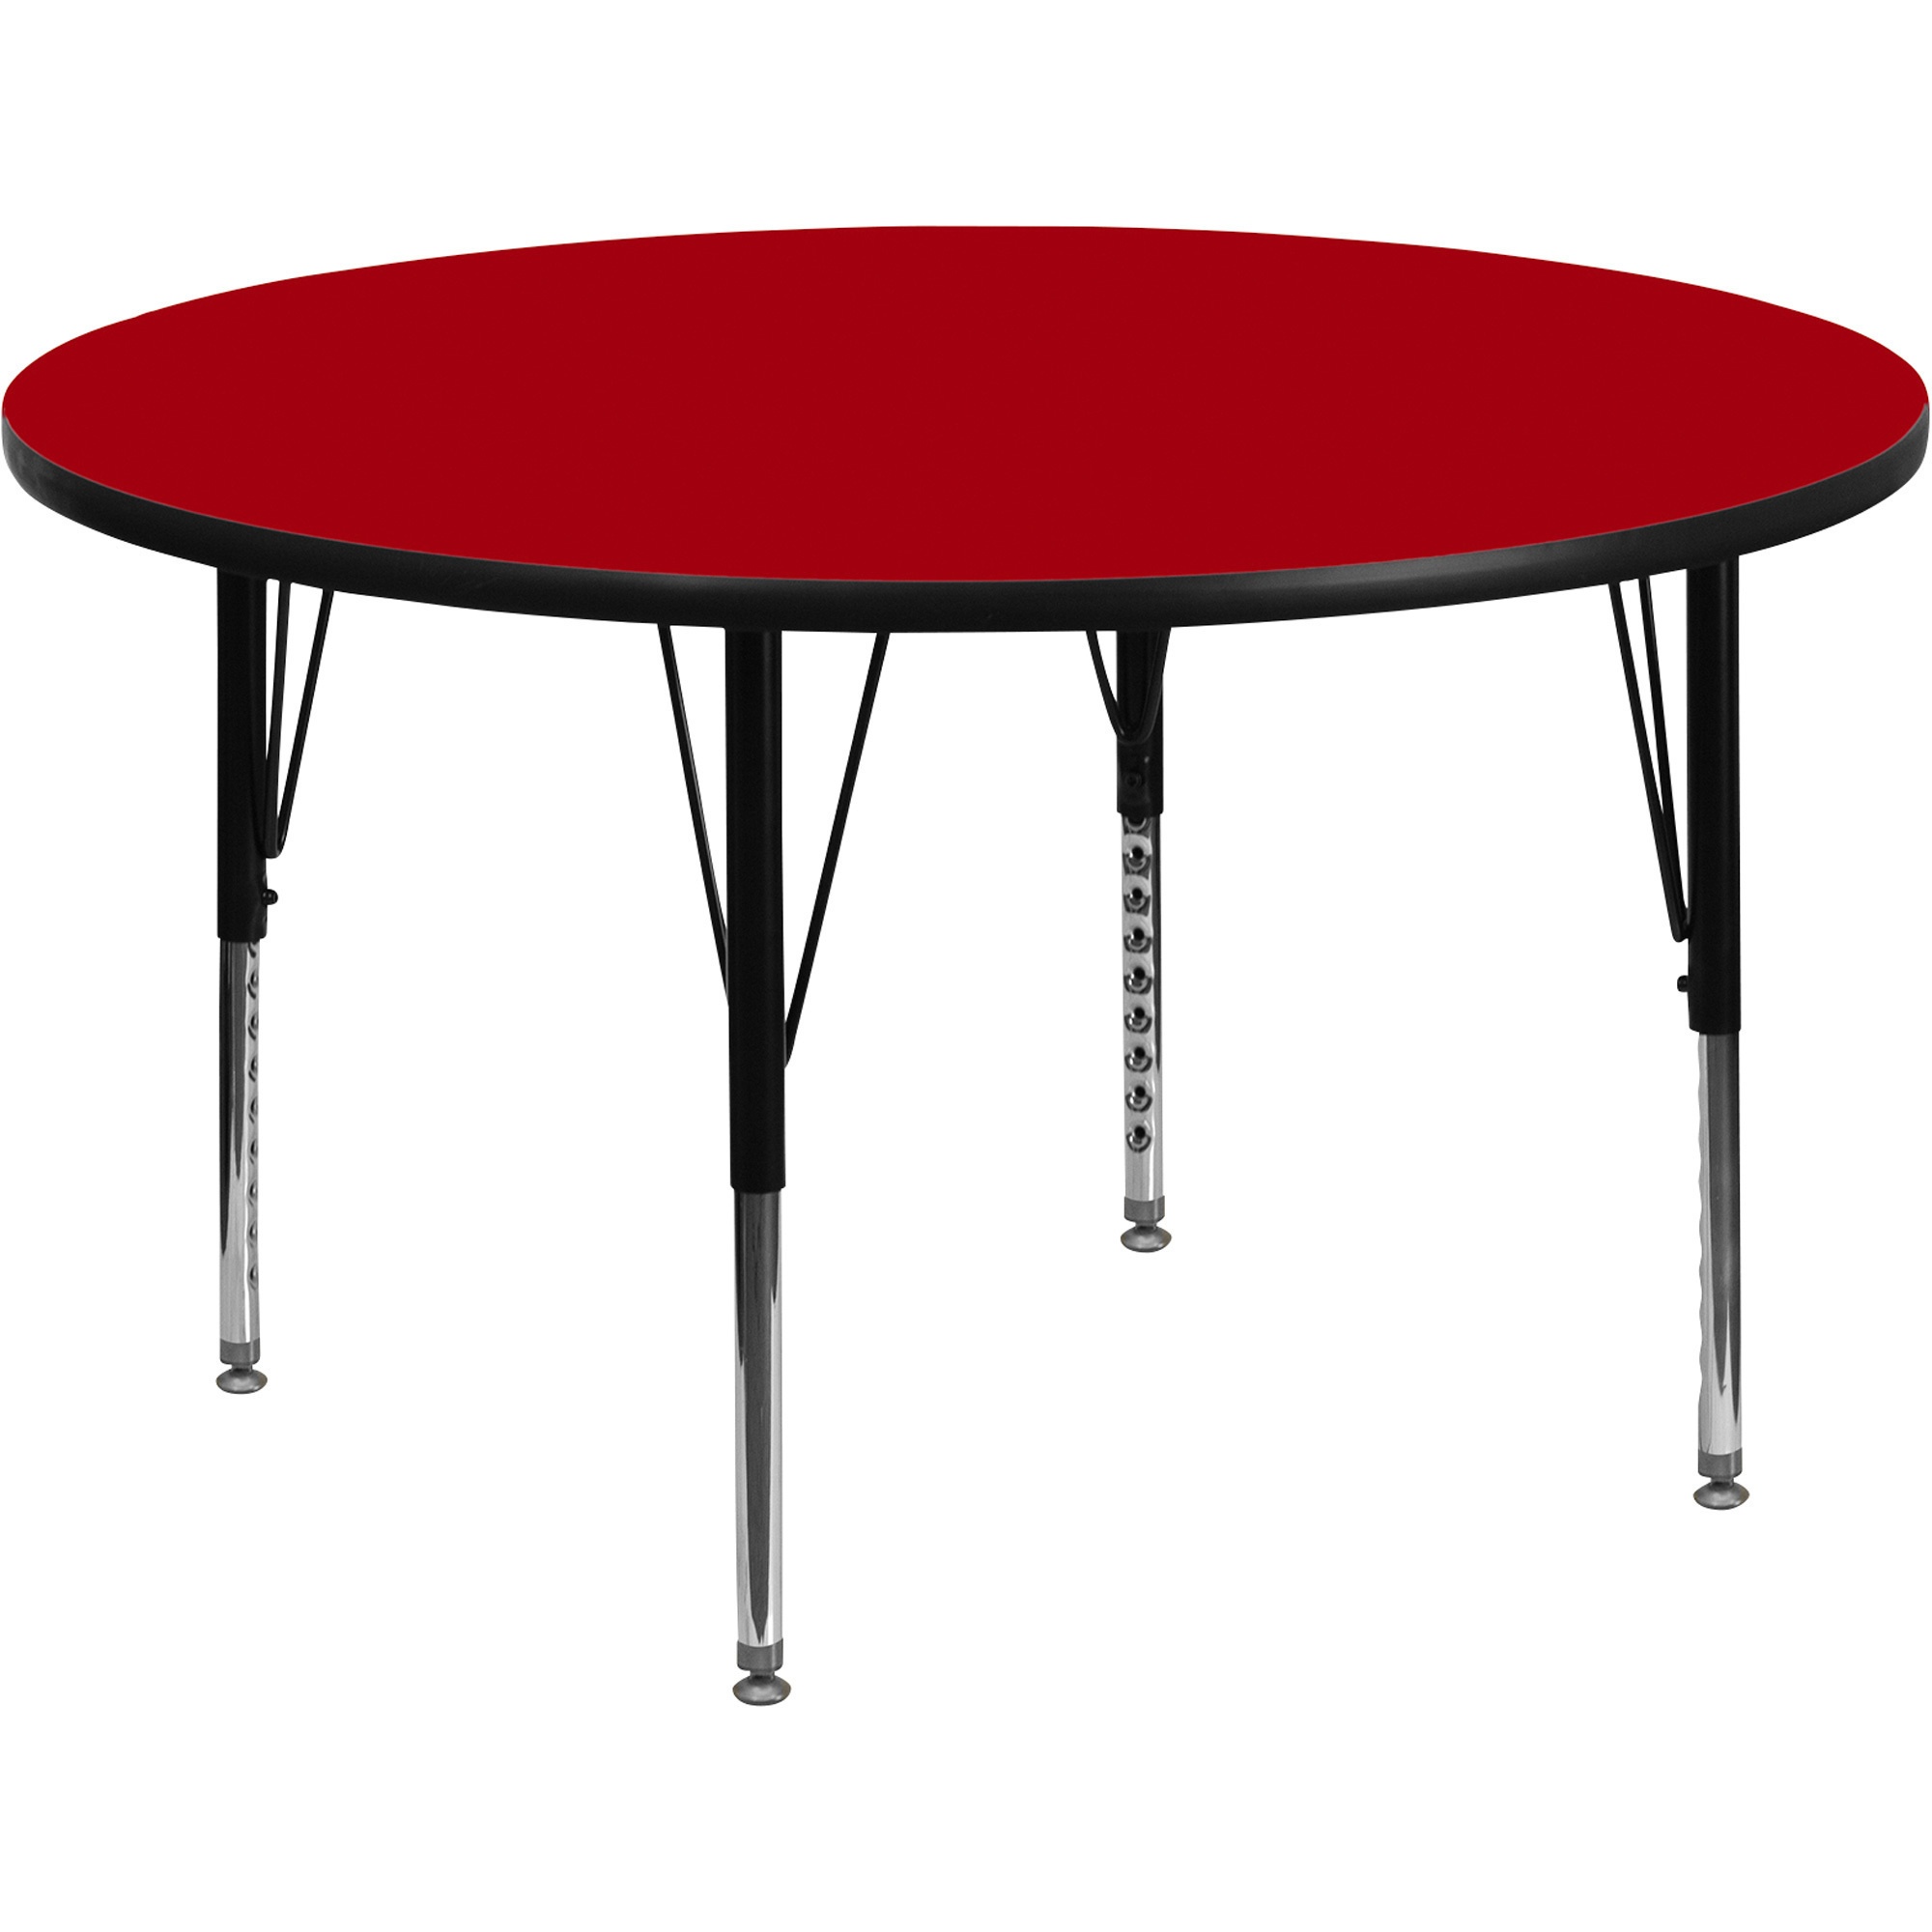 Flash Furniture Mobile Round Activity Table with Height-Adjustable Legs and Locking Casters â Red, 42Inch W x 42Inch D x 16.125â21.125Inch H, Mode